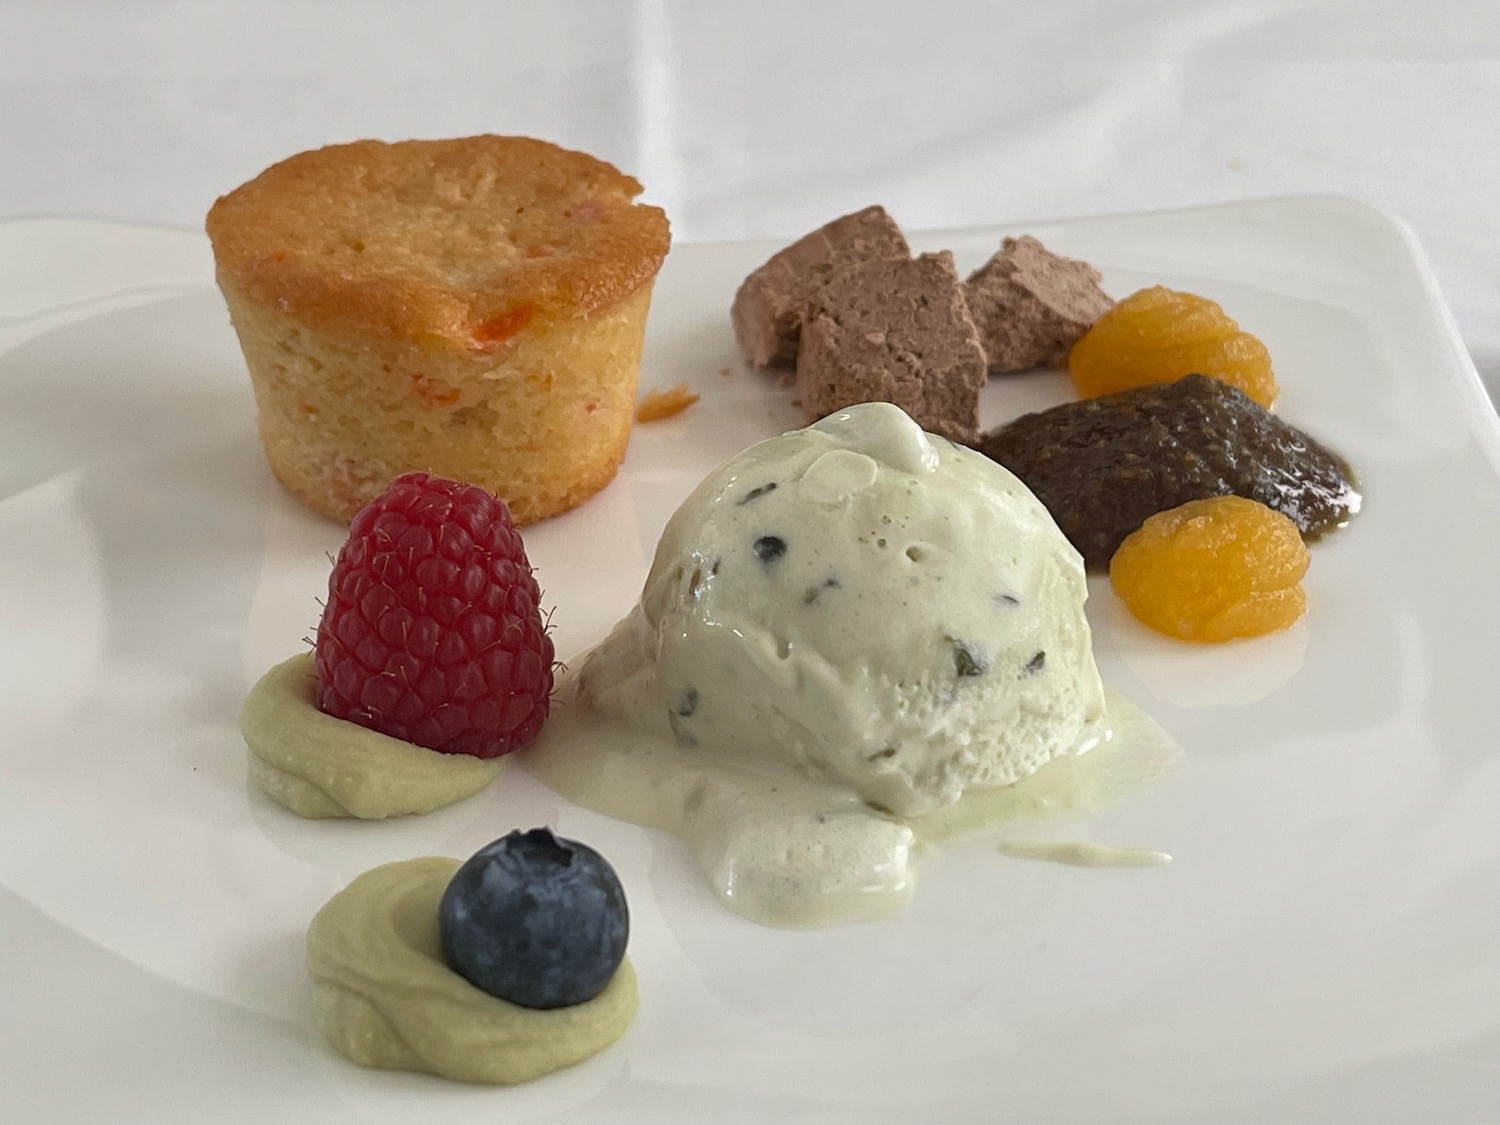 a plate of desserts with ice cream and fruit